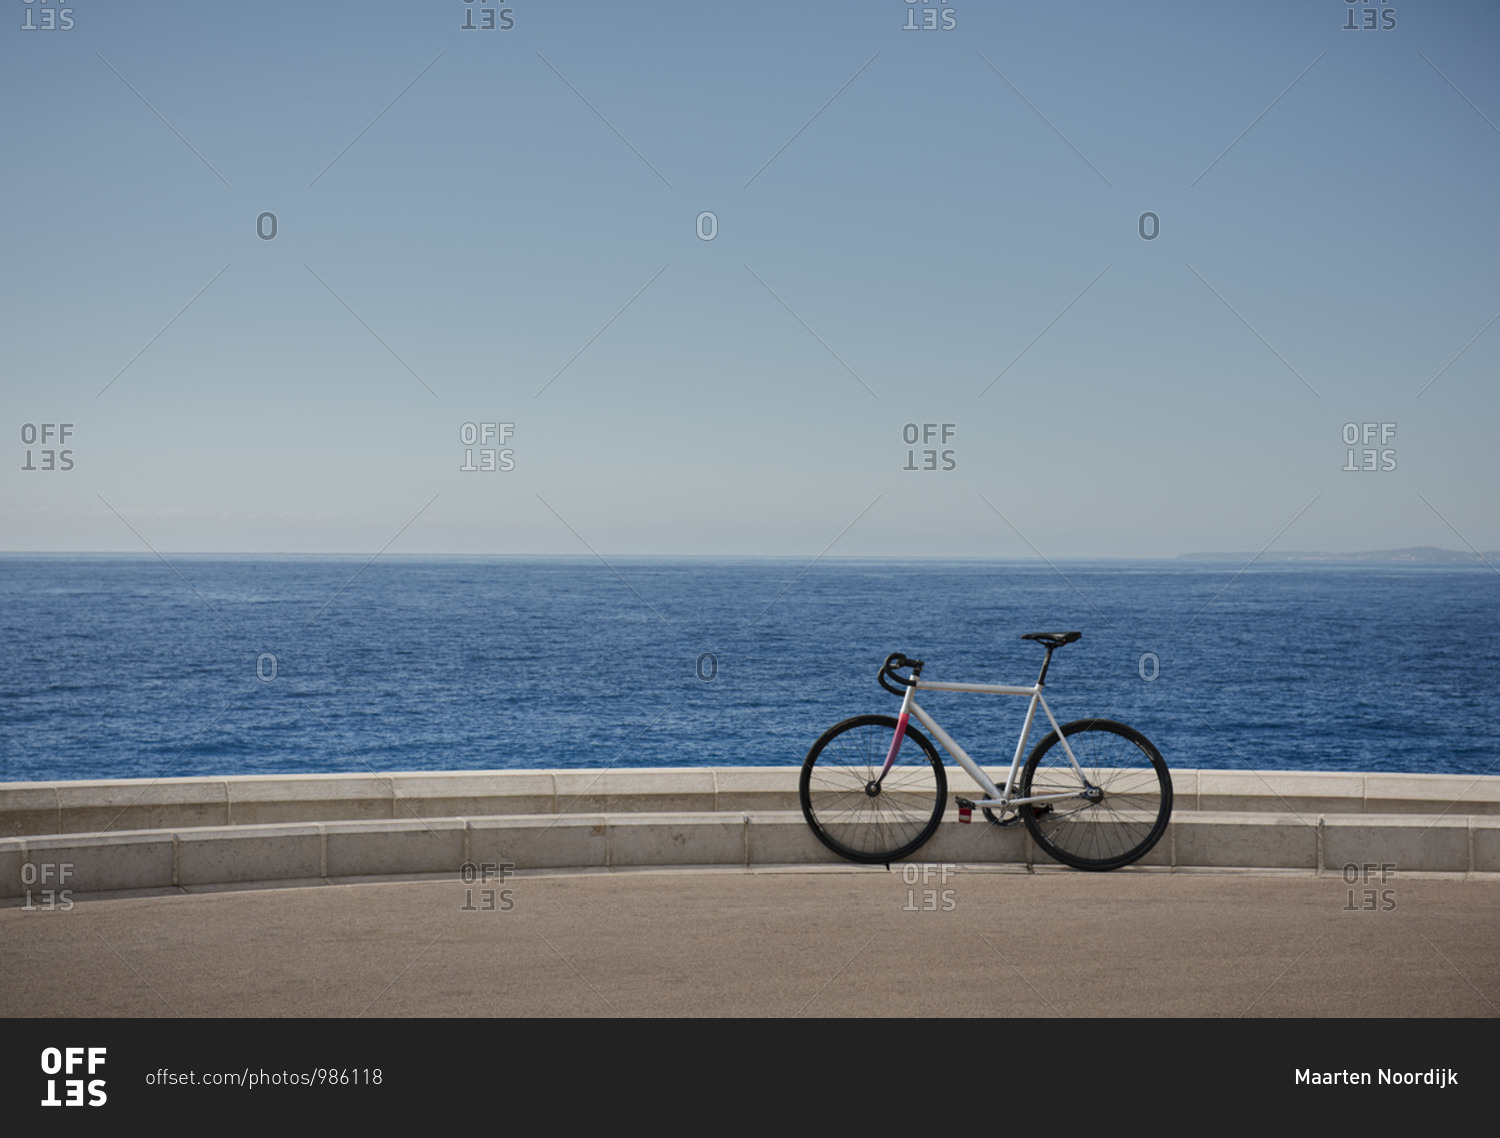 The waters of the Mediterranean sea and a bike resting on the promenade in the city of Nice on the d\'Azur in France.